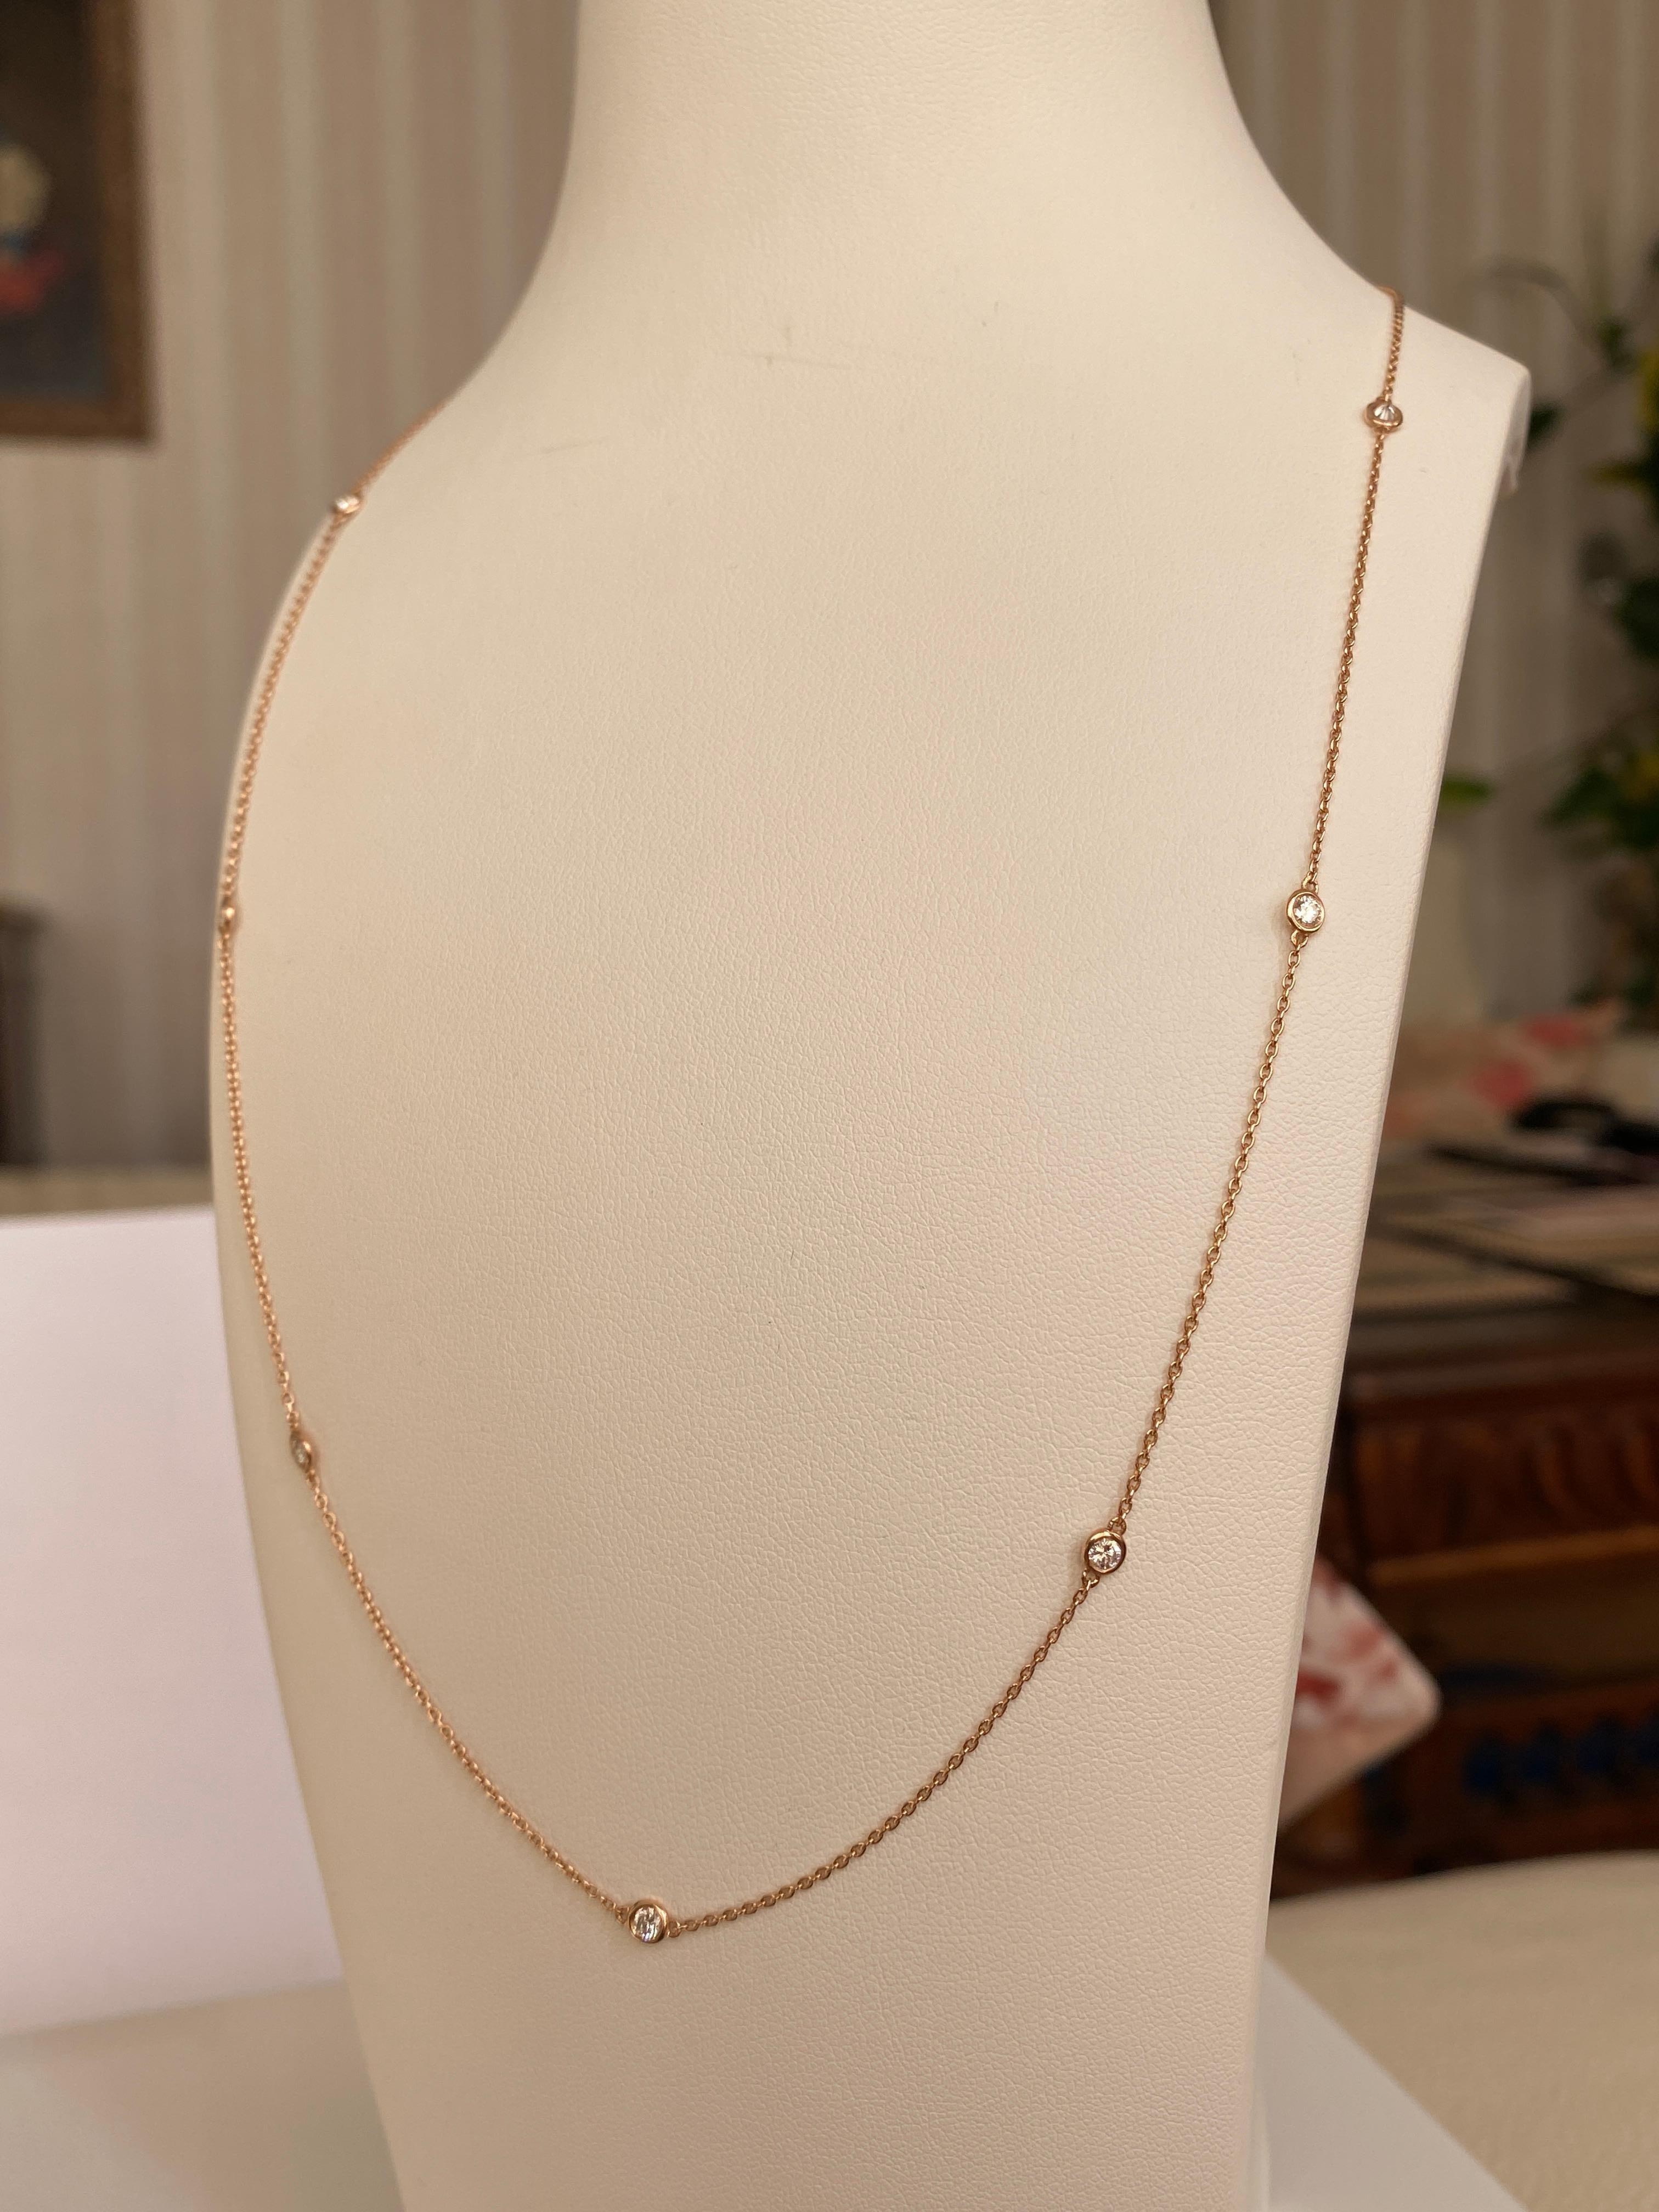 Offered in new condition, 18-carat pink gold necklace set with 8 brilliant-cut diamonds of approx. 0.40 ct G/VS/SI. 
Contents of necklace: 18 KT (stamped 750) 
Diamonds – approx. 0.40 ct G/VS/SI
 Weight: 2.6 grams
 Necklace length: 49 cm .
Delivered